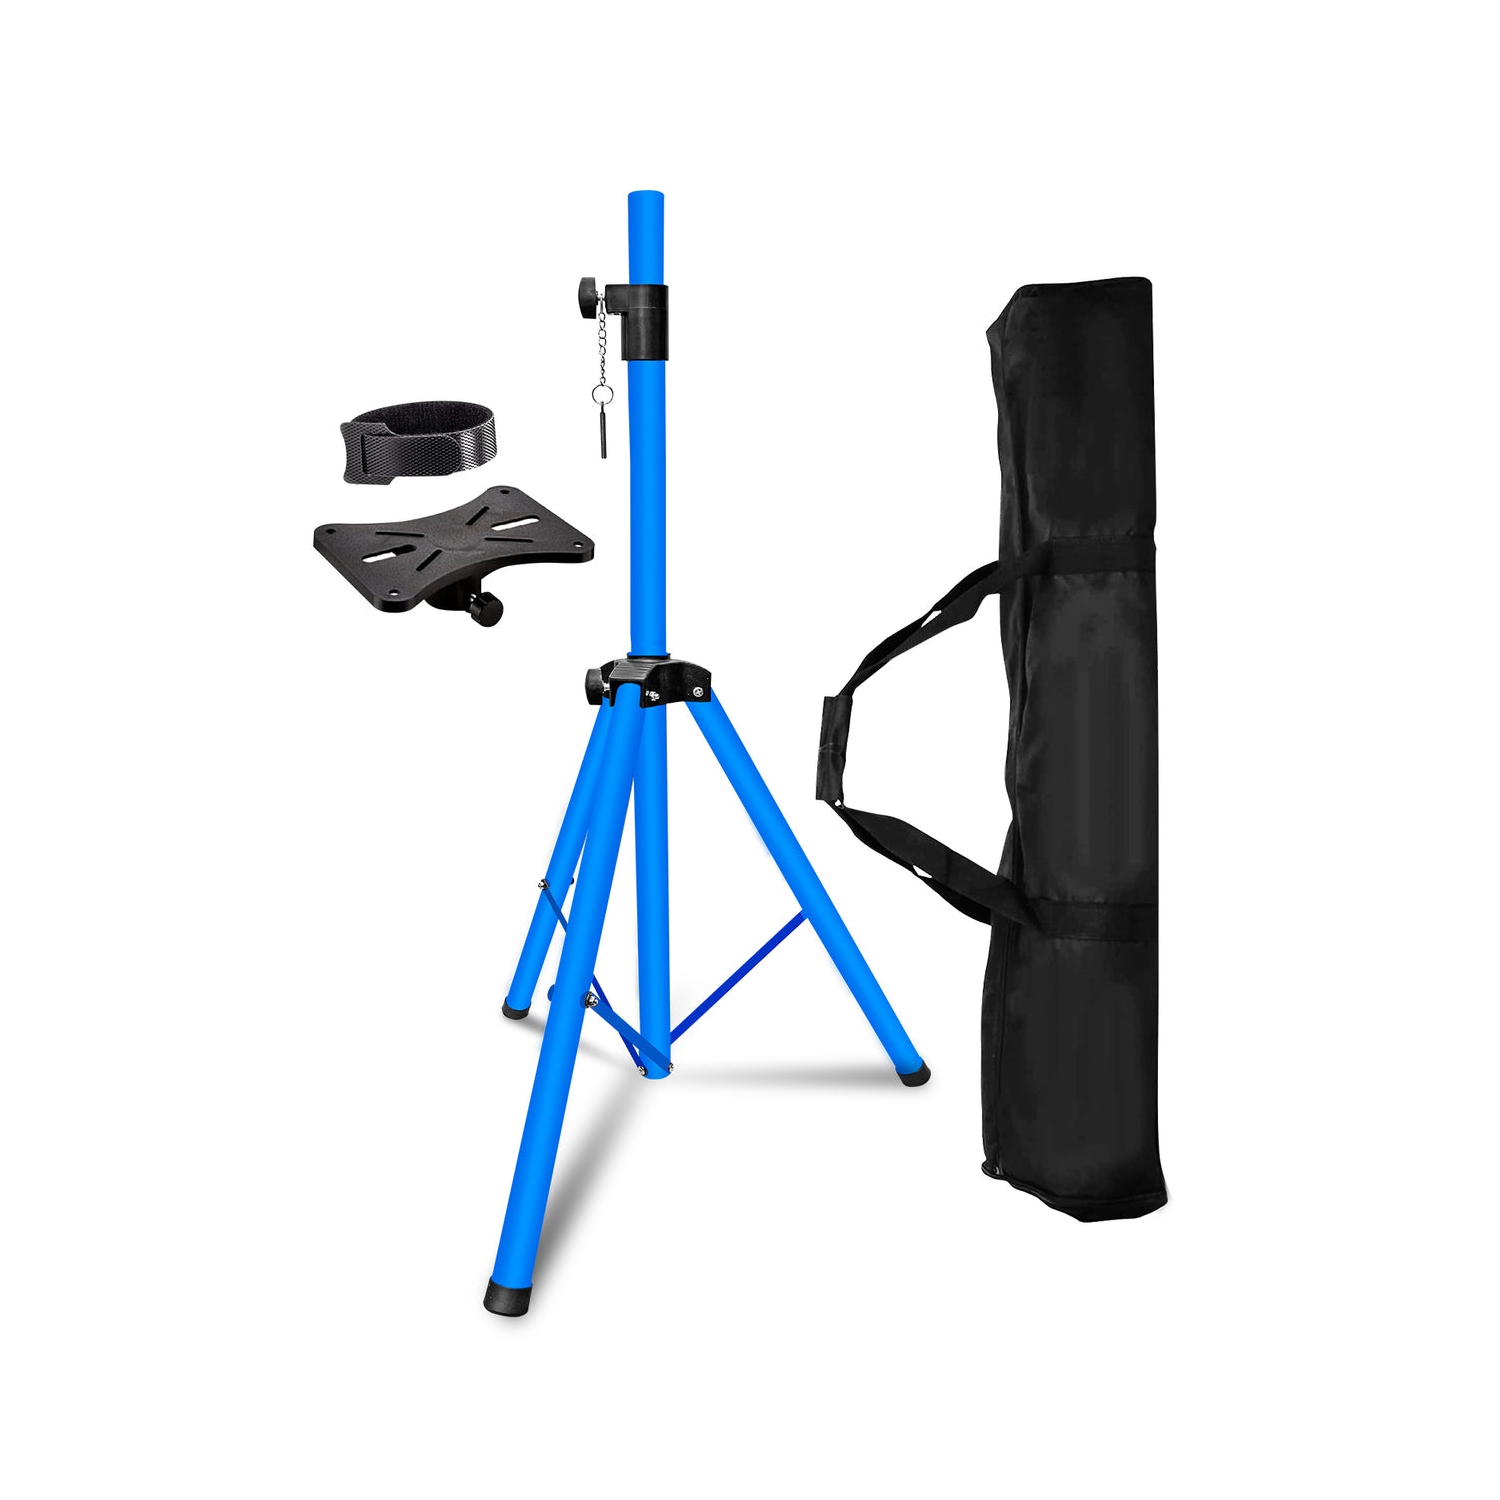 5 Core Speakers Stands 1 Piece Sky Blue Heavy Duty Height Adjustable Tripod PA Speaker Stand For Large Speakers DJ Stand Para Bocinas Includes Carry Bag- SS HD 1 PK SKY BLU BAG